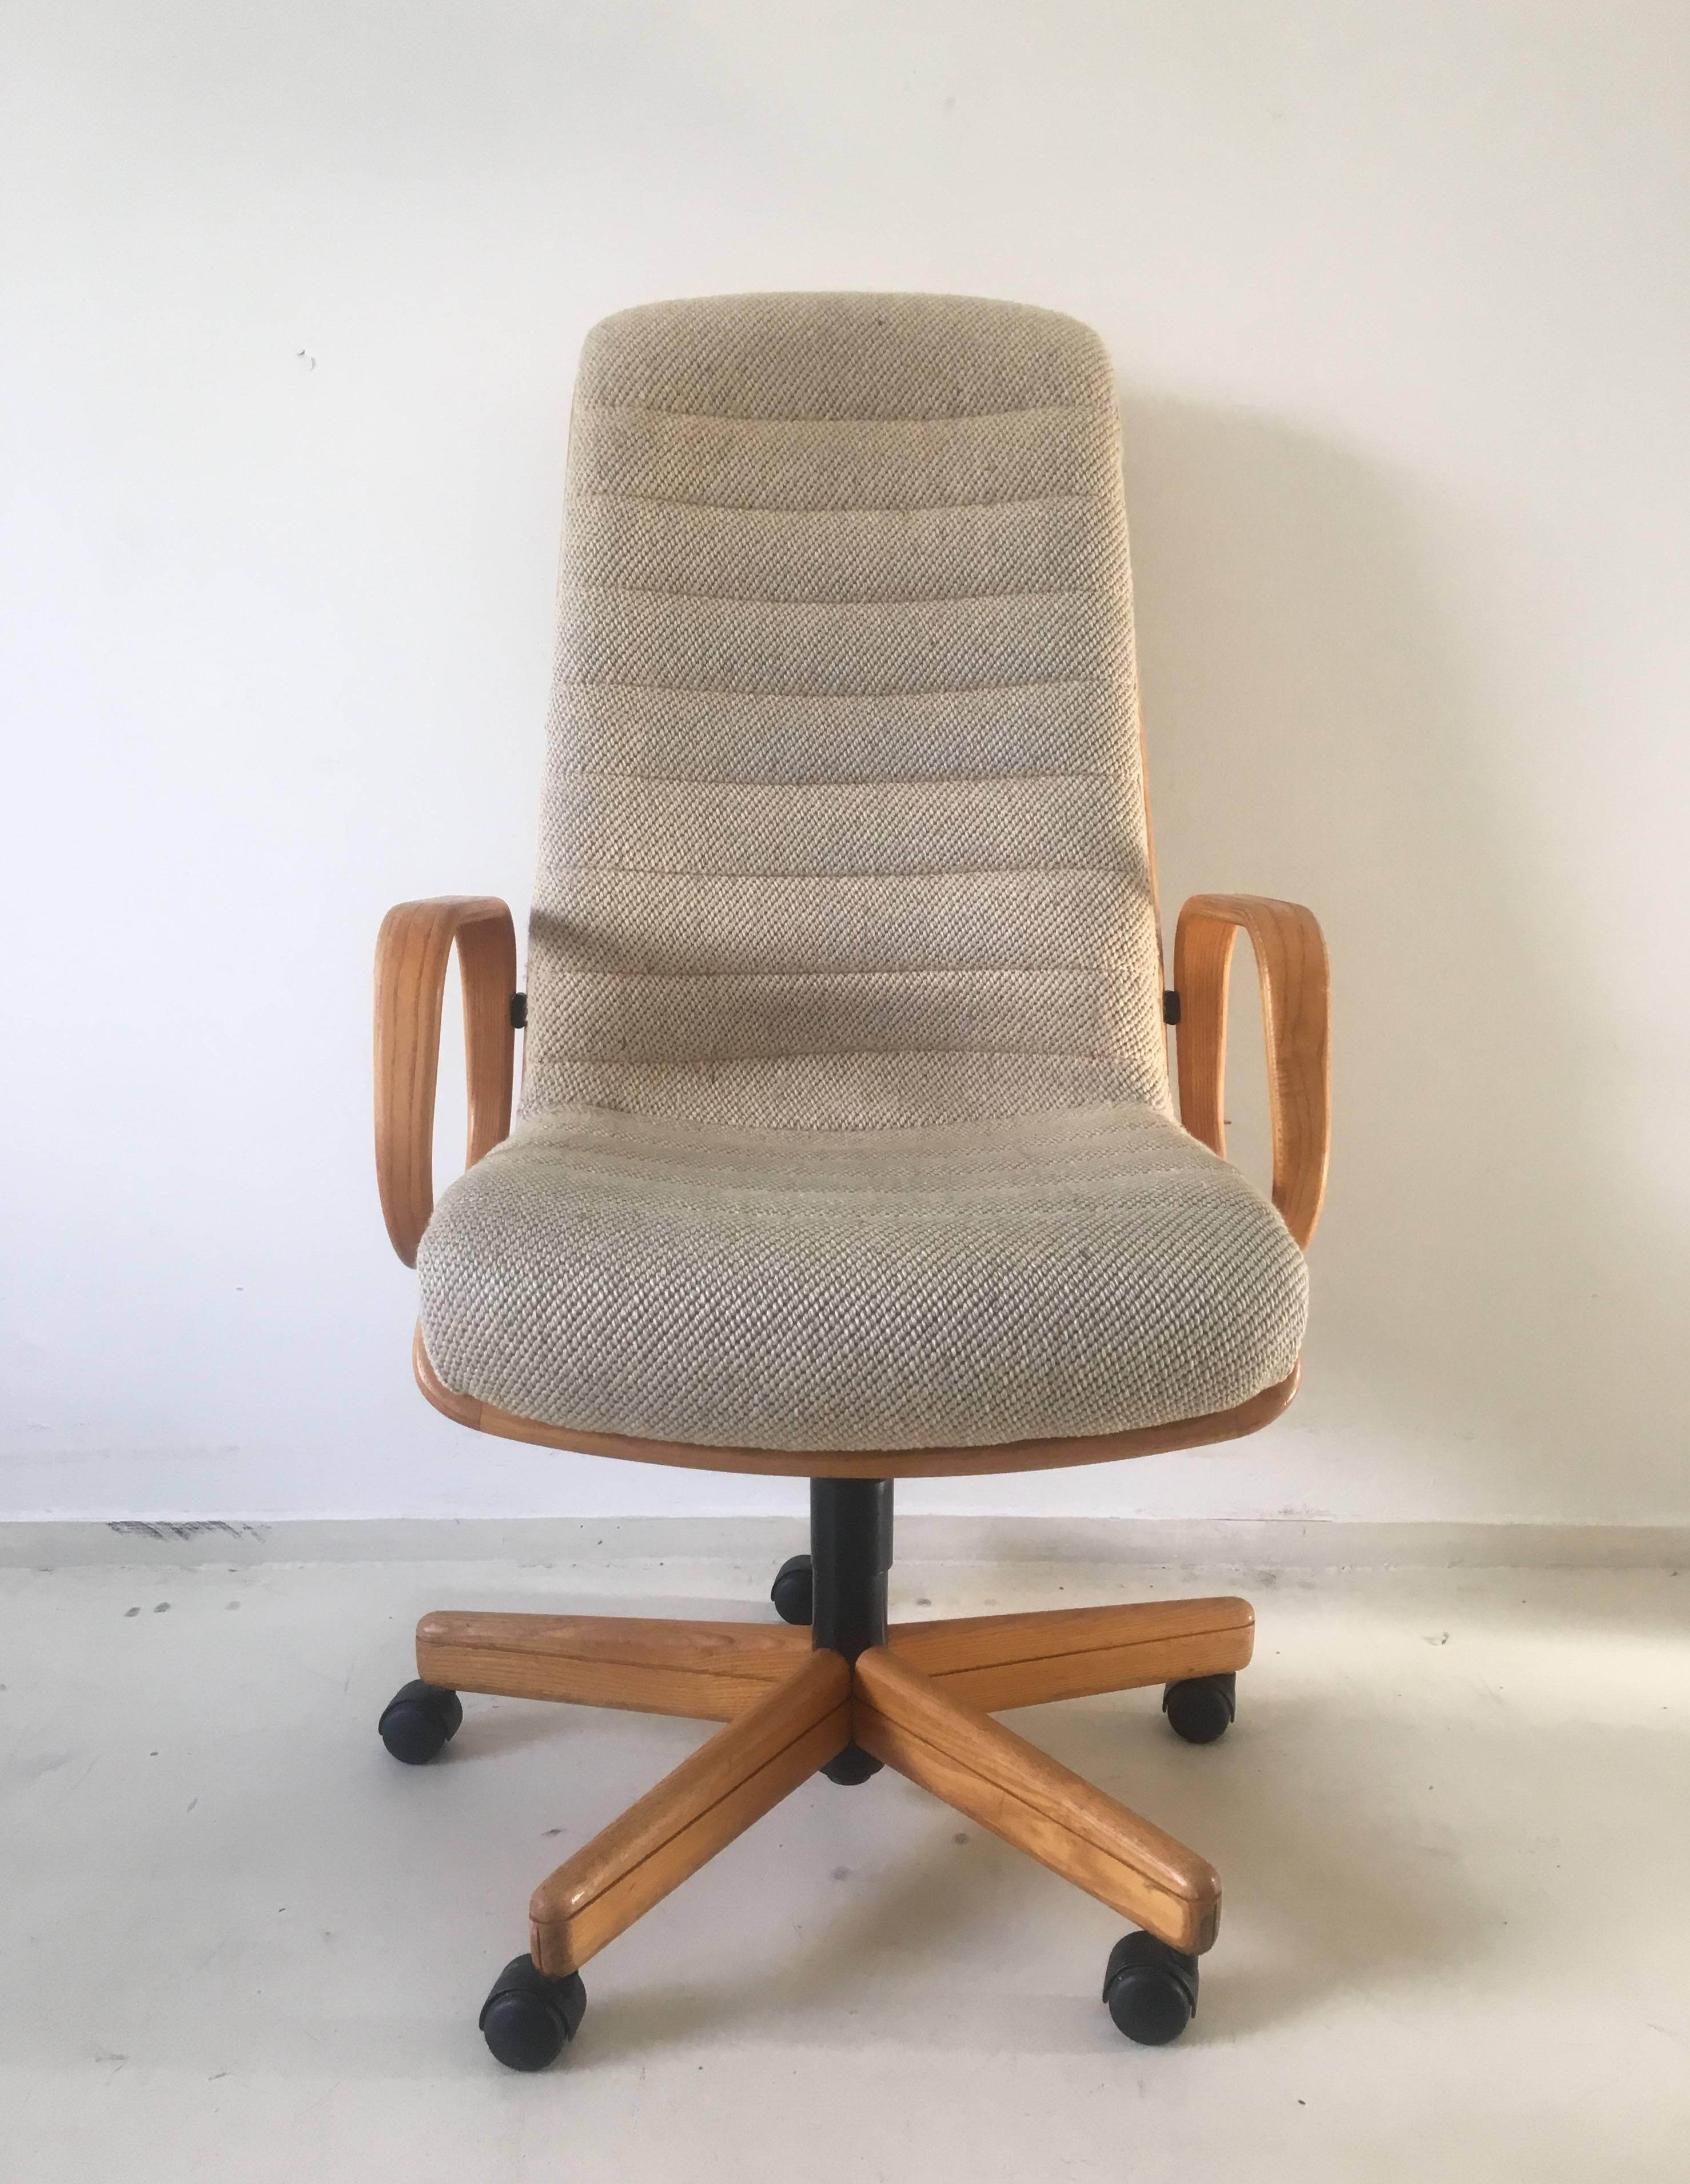 Absolutely wonderful design, which was given the purpose to have a natural look and comfort. 
The chair features a massive oak frame and five star base. It was upholstered with basic colored wool. 
This exclusive chair can be adjusted in height